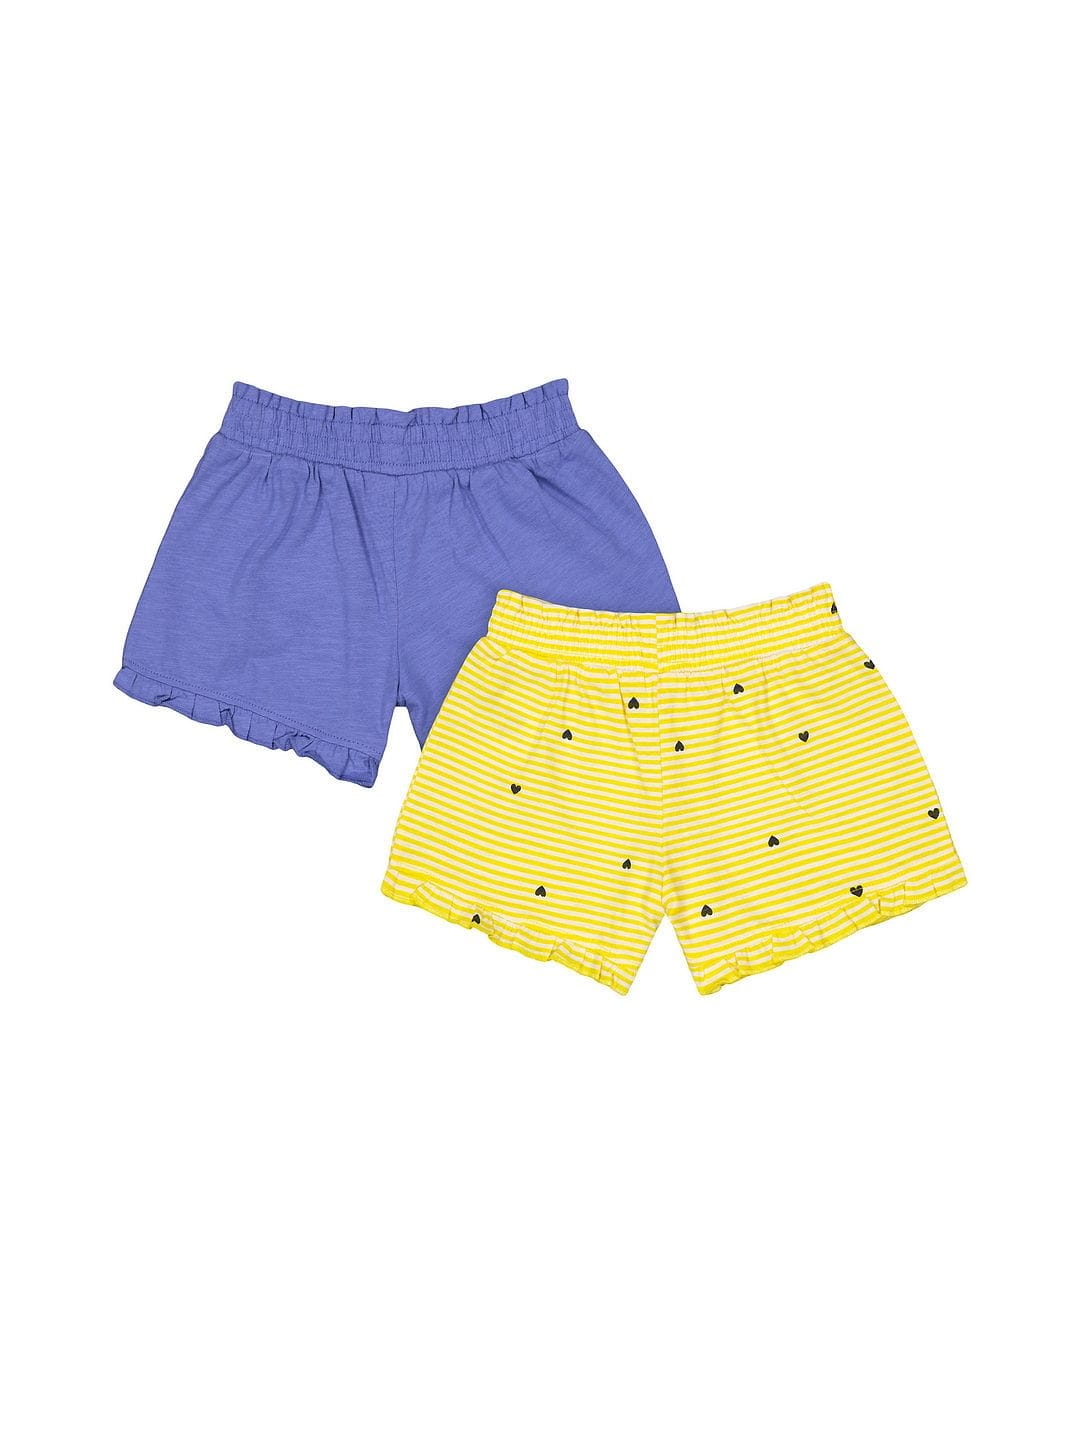 Girls Stripe Frilled Jersey Shorts - Pack Of 2 - Multicolor